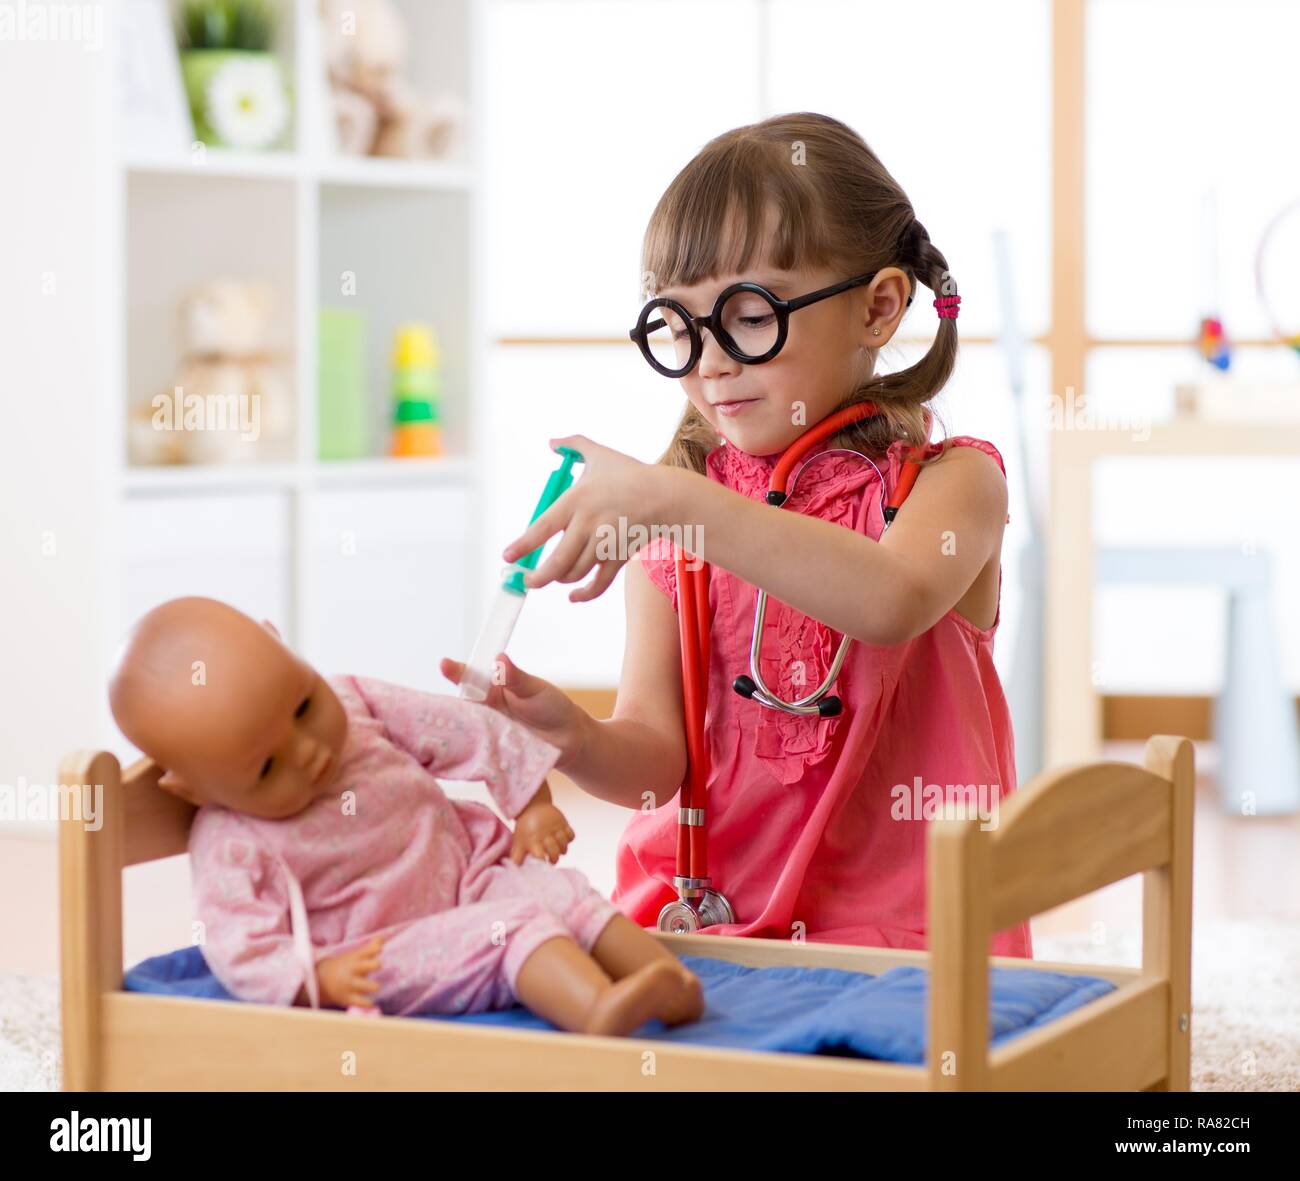 Child little girl playing with toy doll in nursery Stock Photo